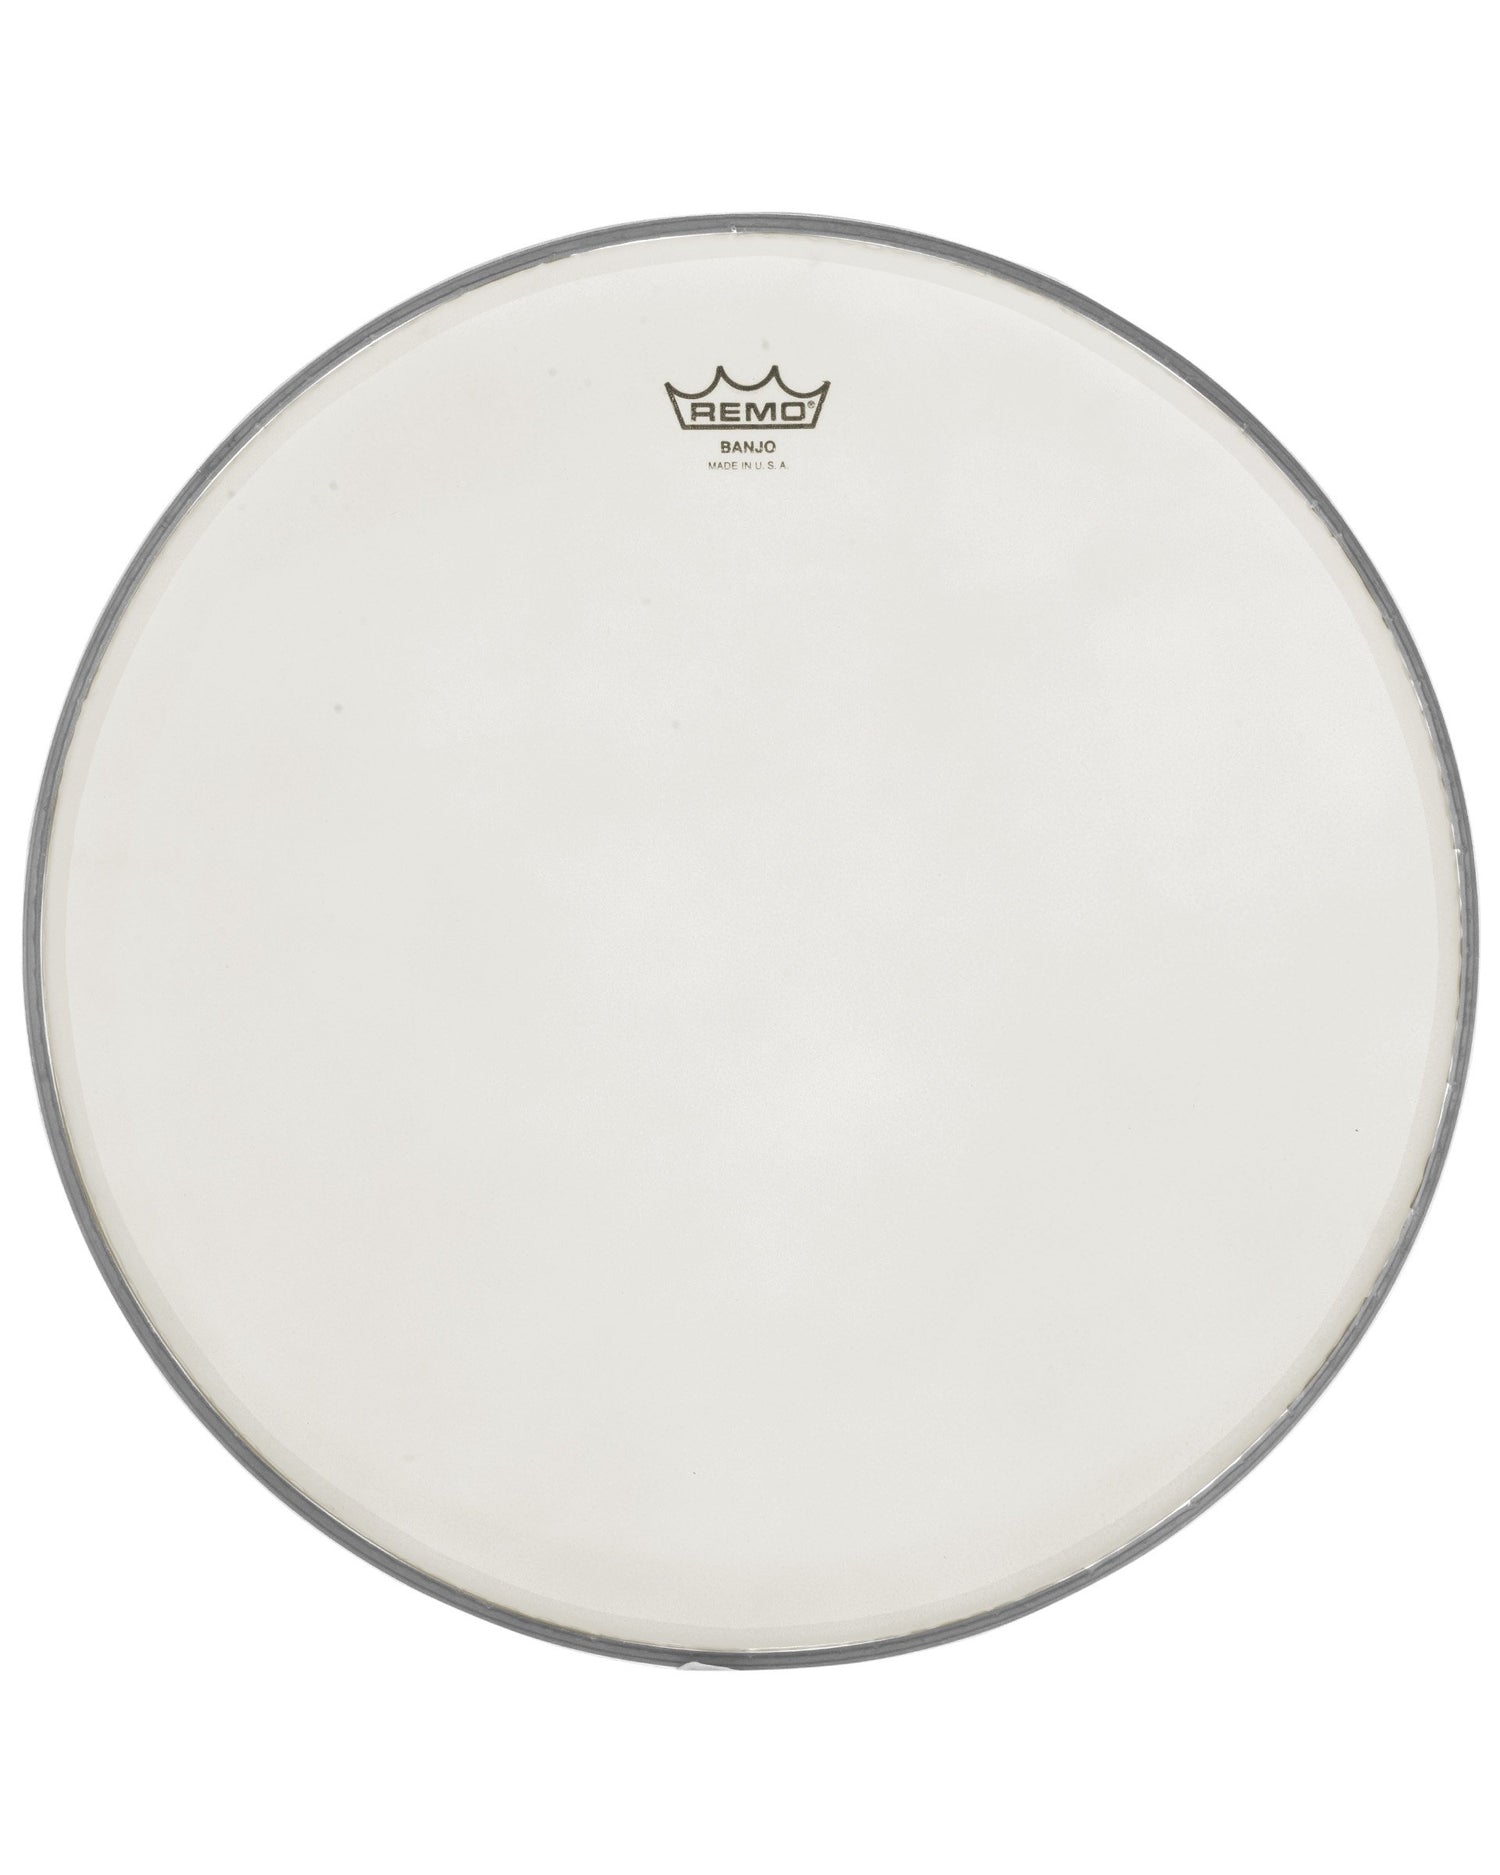 Image 1 of Remo Cloudy Banjo Head, 10 15/16 Inch Diameter, High Crown (1/2 Inch) - SKU# B1015-H-CDY : Product Type Accessories & Parts : Elderly Instruments